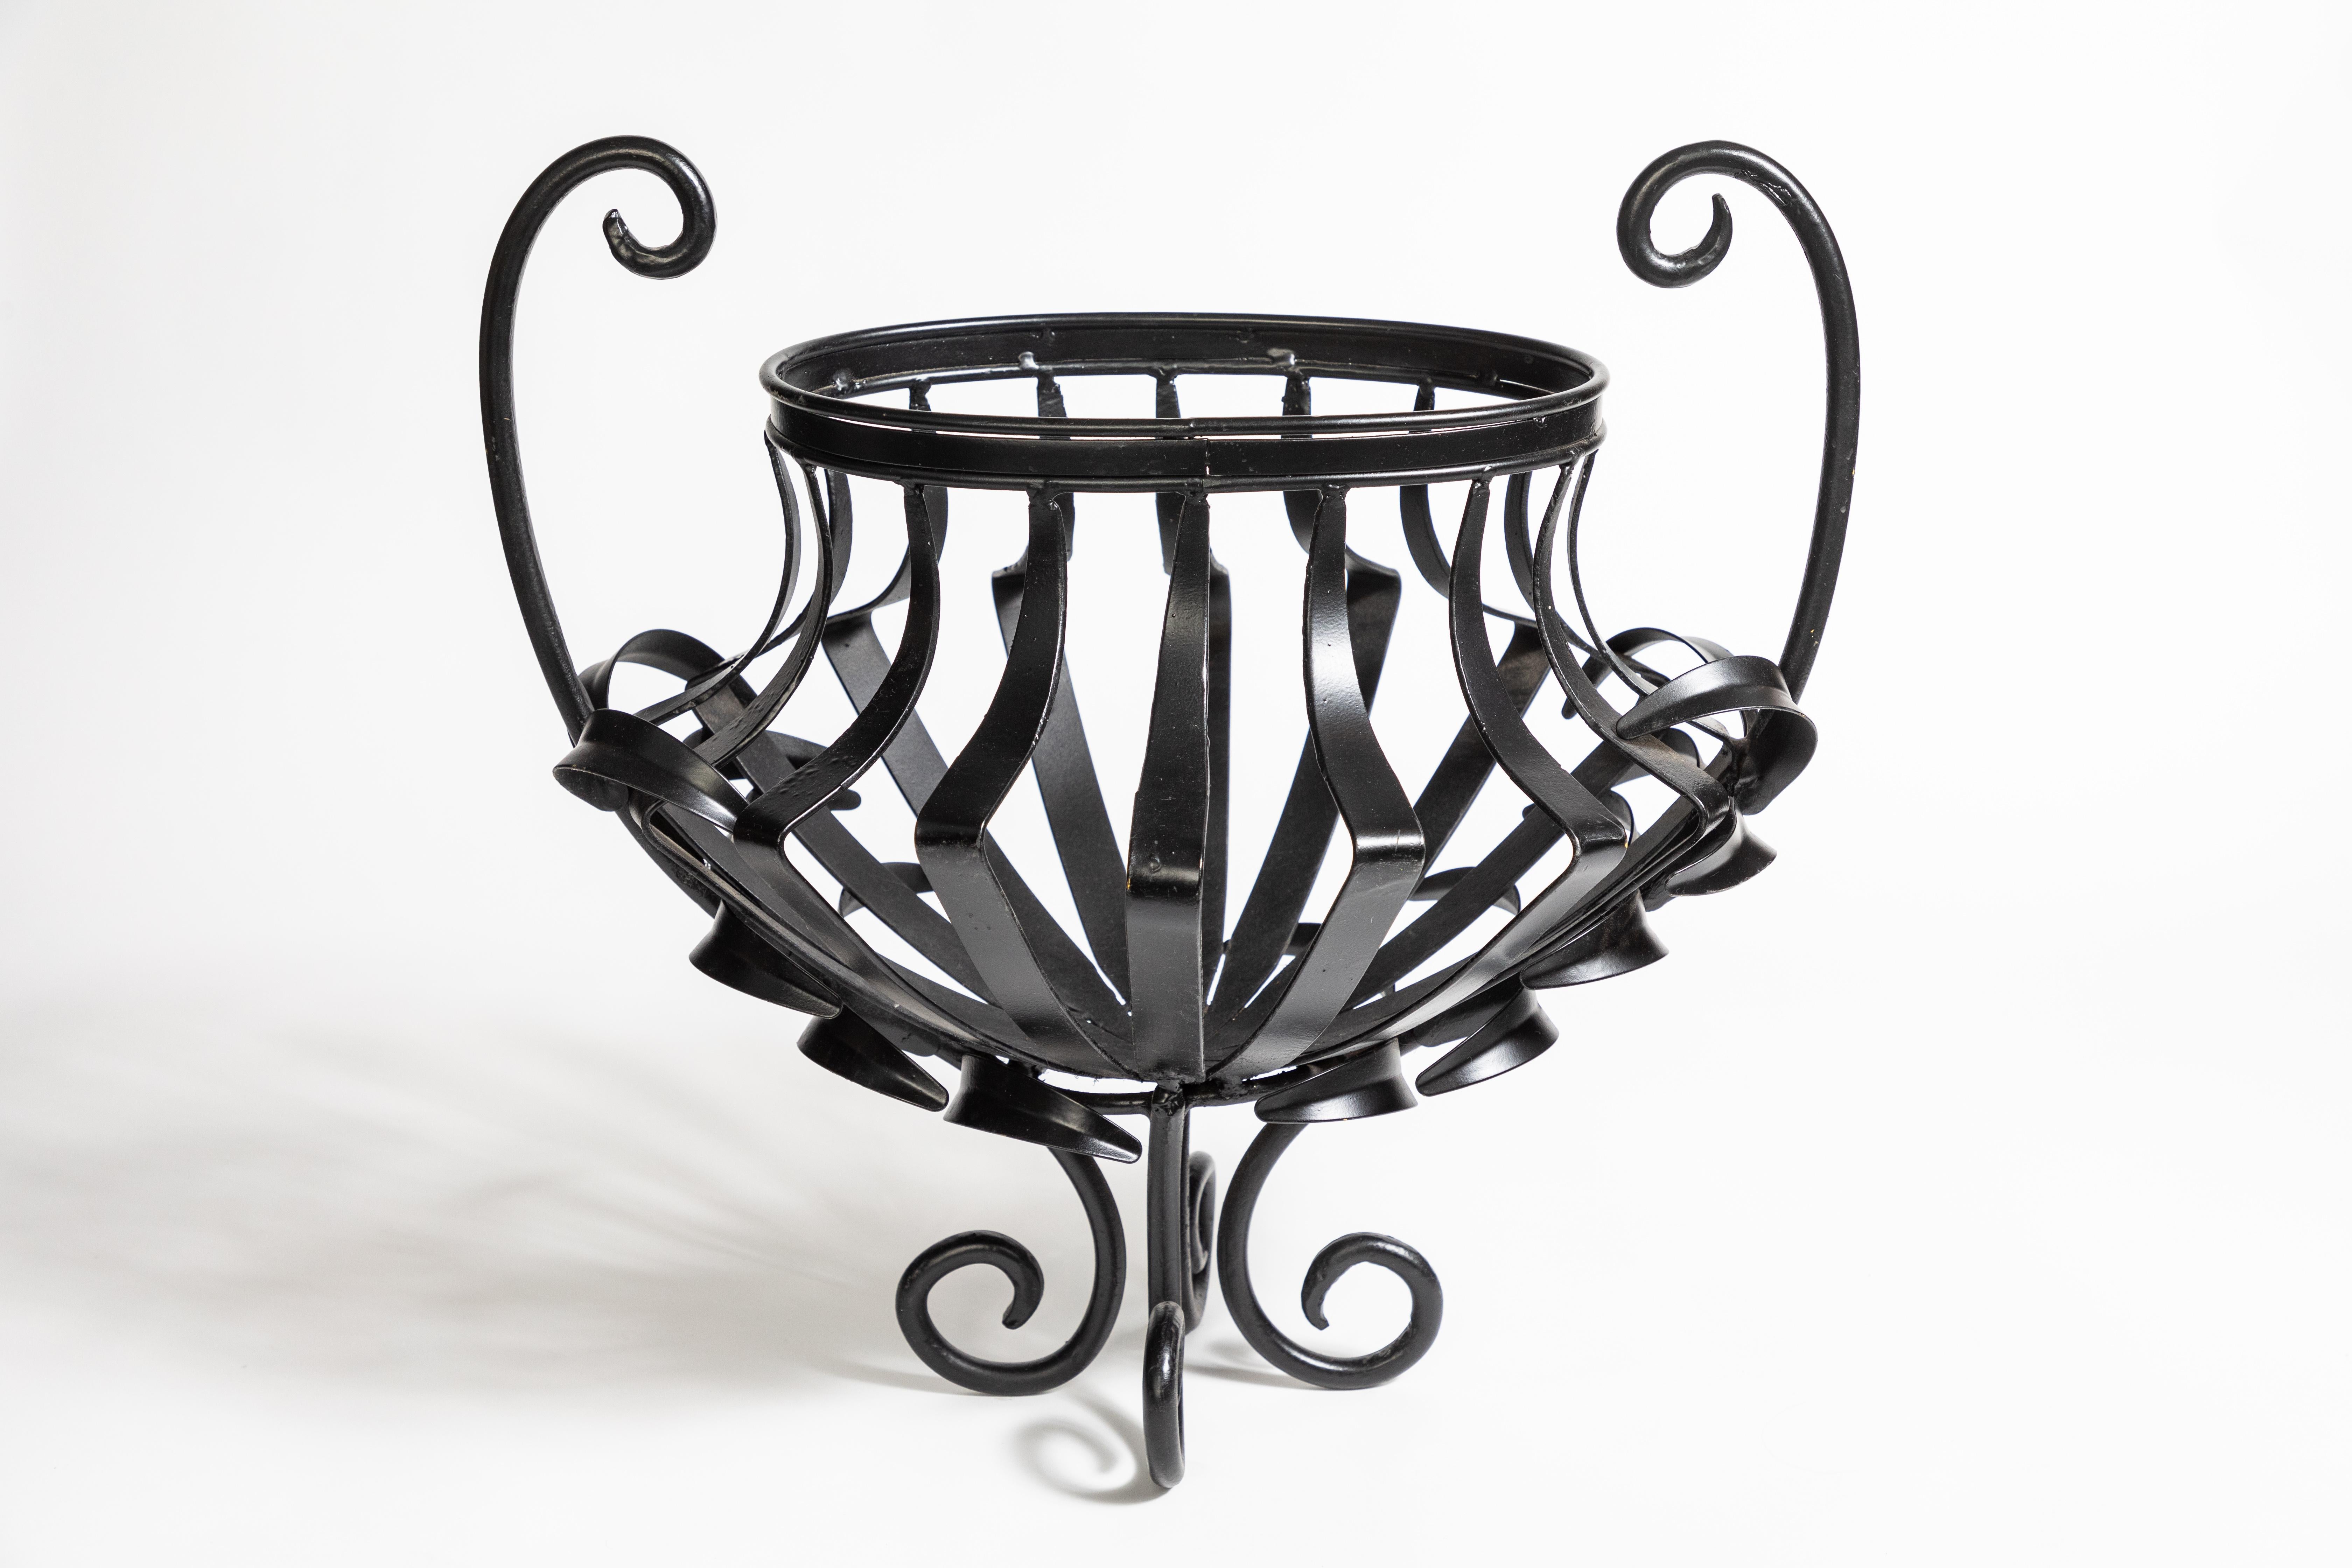 1940s oval wrought iron urn strap planter with scroll feet and handles

Newly refinished with black lacquer.